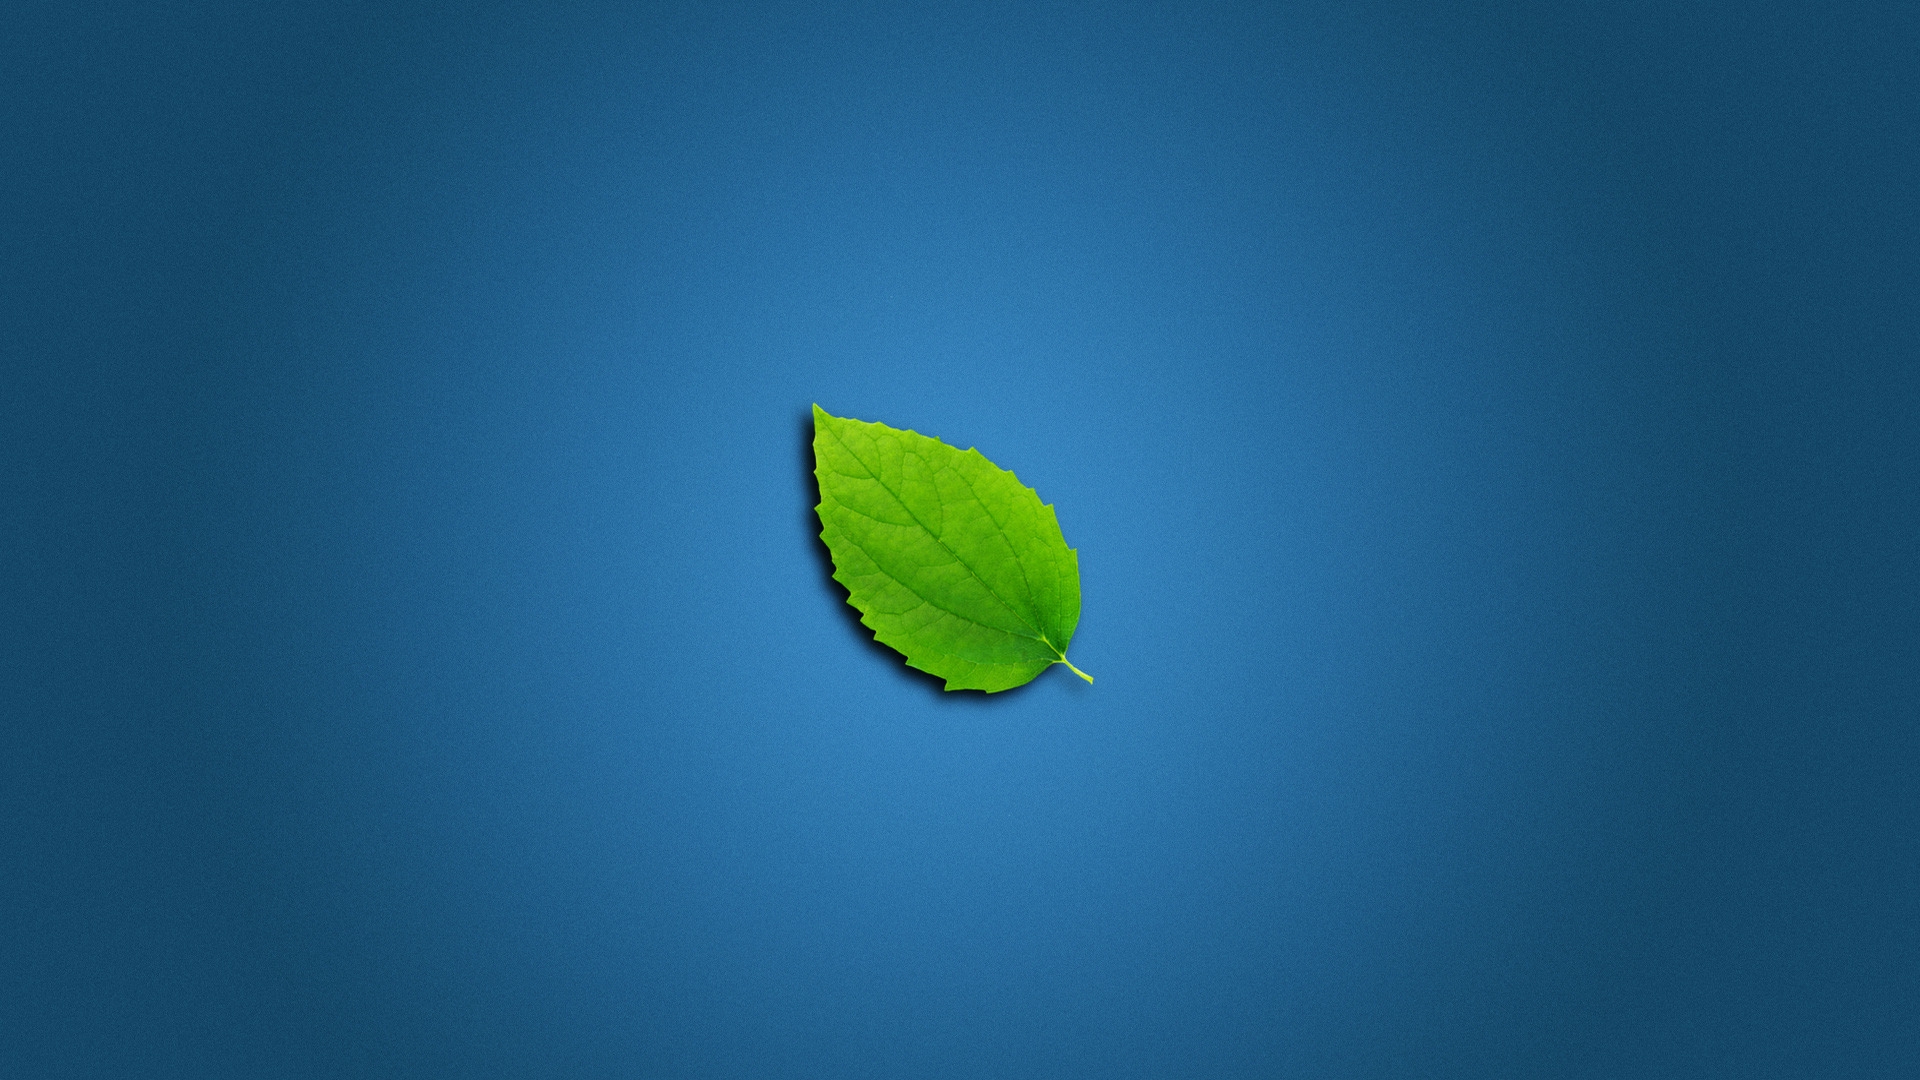 Lonely Leaf for 1920 x 1080 HDTV 1080p resolution